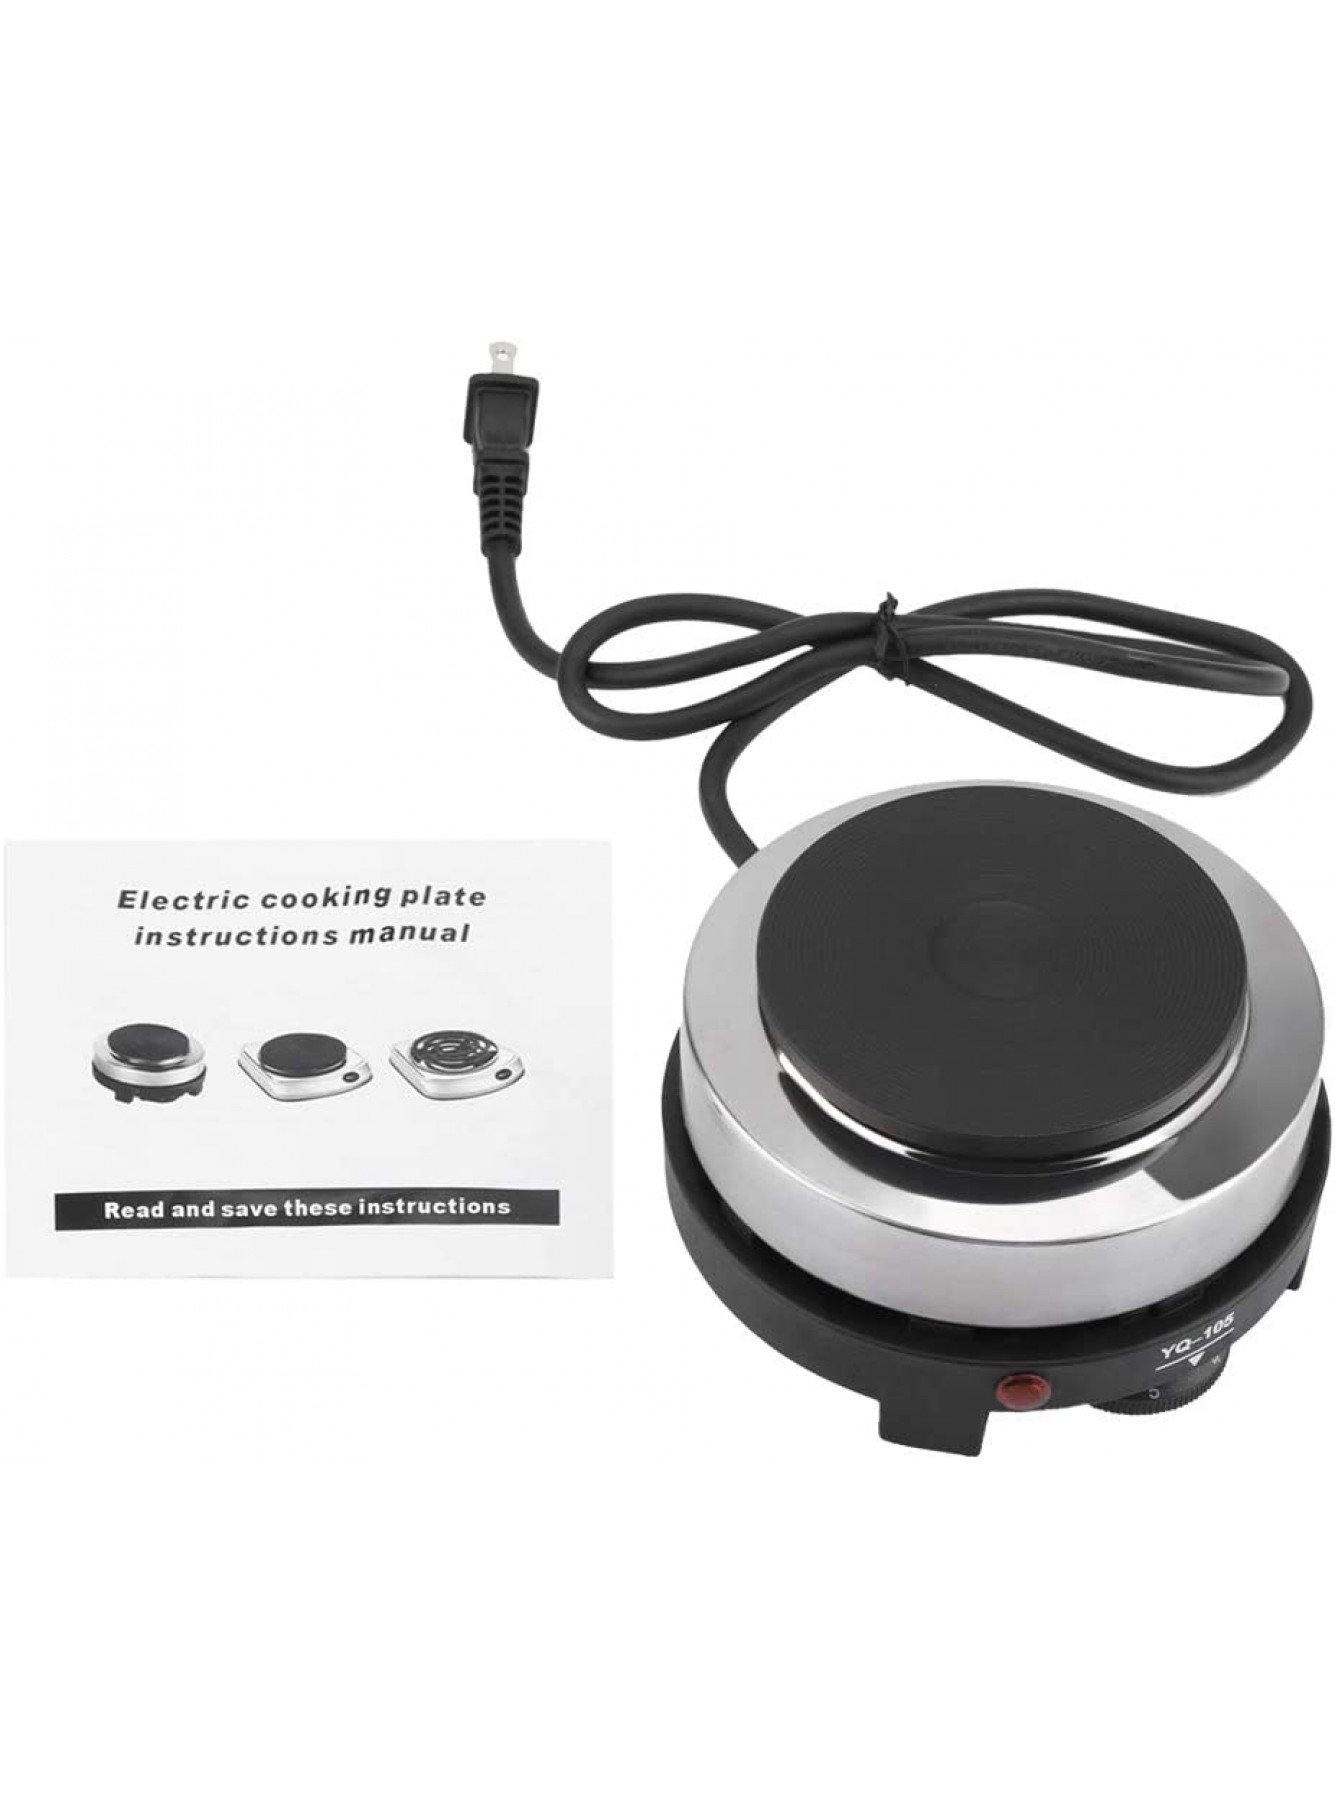 Electric Cooktop Stove Burner Portable Stove Portable Electric Stove Countertop Stove Electric Hot Plate Hot Plate Electric for Home Dorm for Office Camp B08NW6K7BW